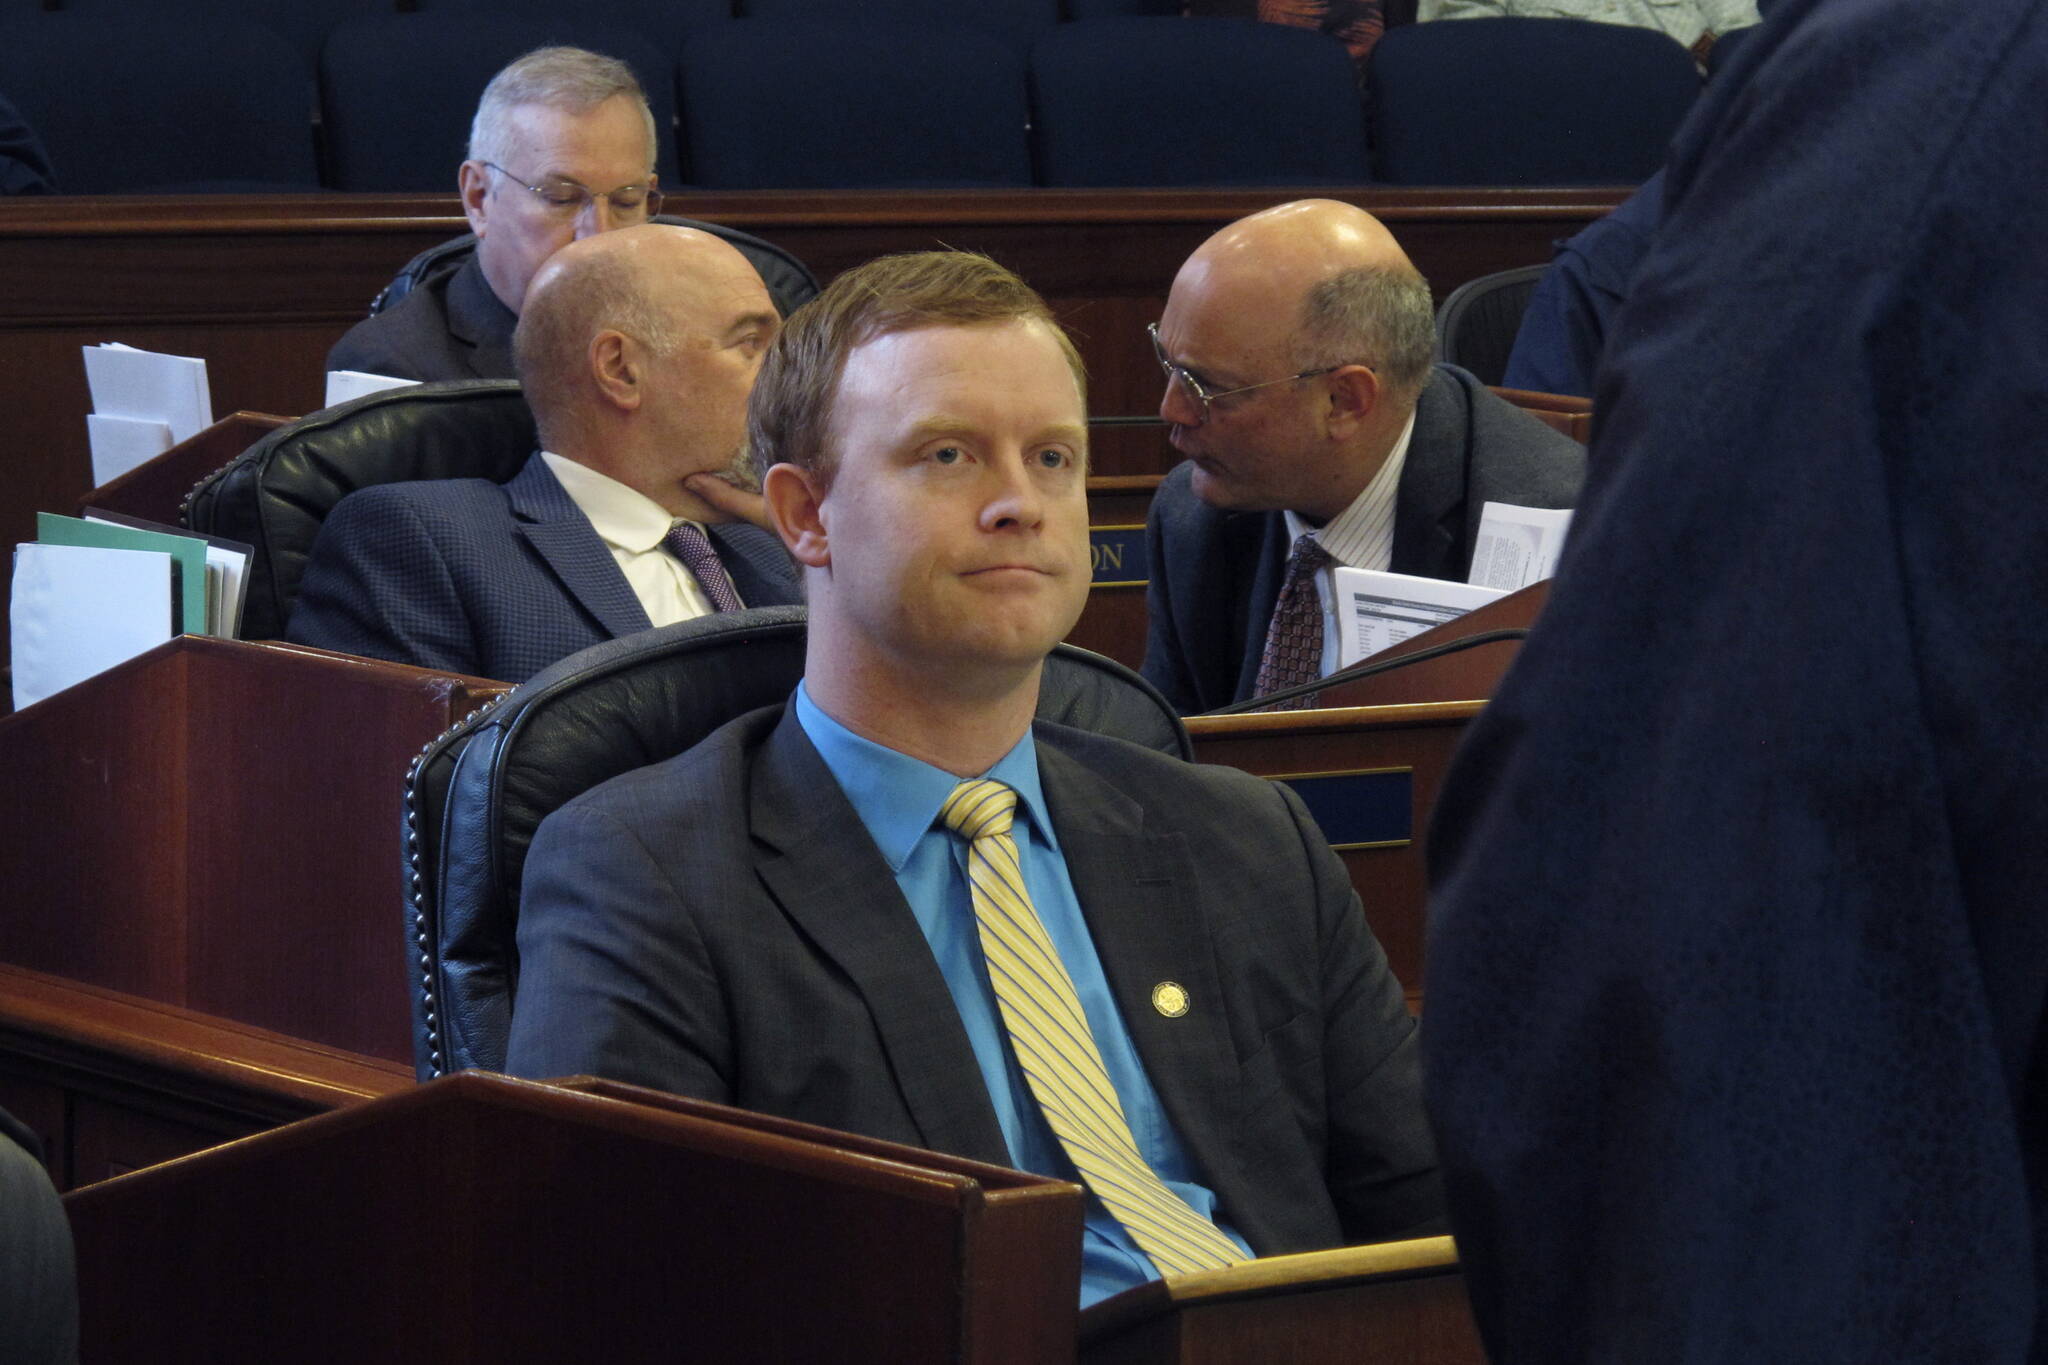 Alaska State Rep. David Eastman, a Wasilla Republican, is shown seated on the House floor on April 29 in Juneau. His district seat is among those whose fate is unknown, due to a pending lawsuit challenging his eligibility because of his membership in Proud Boys. (AP Photo/Becky Bohrer, File)